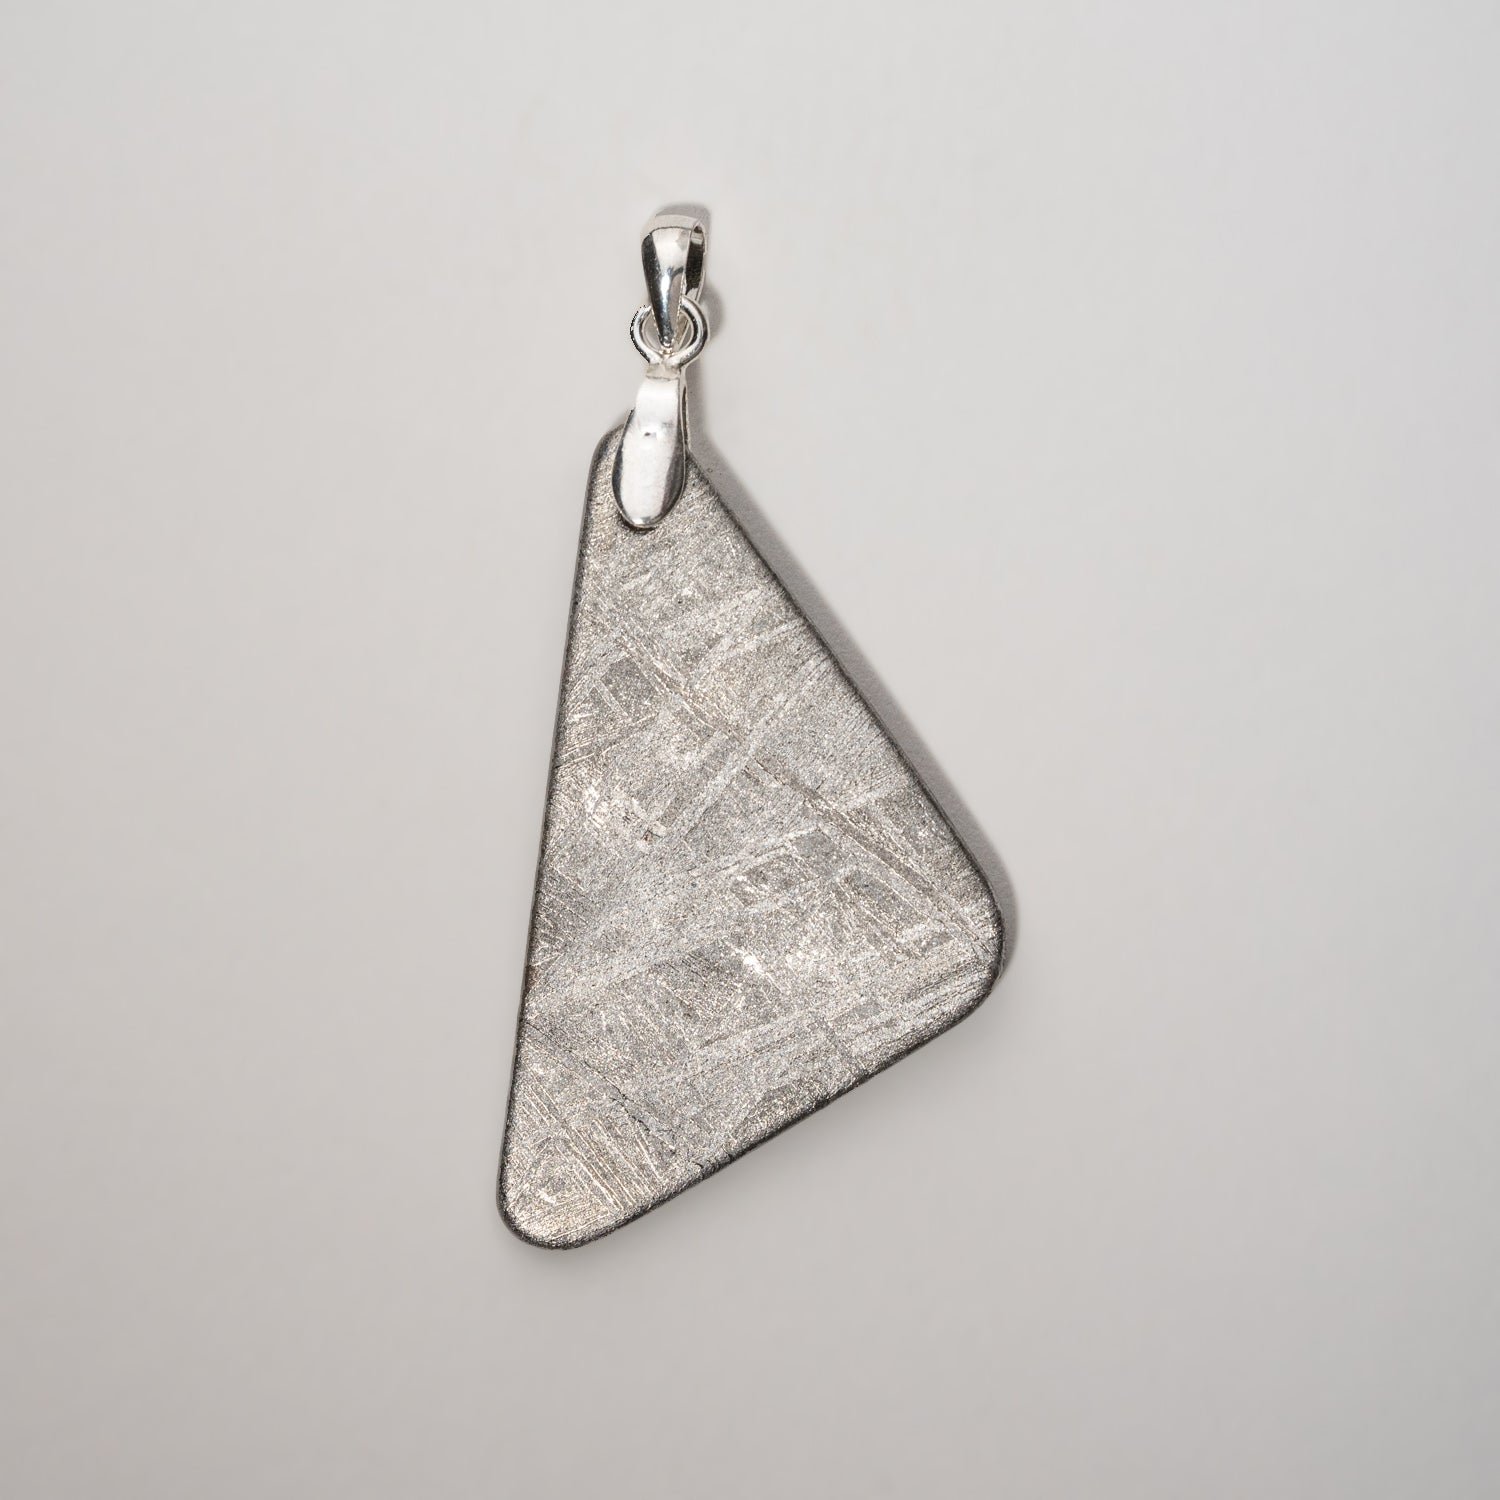 Polished Seymchan Meteorite pendant (6.7 grams) with 18" Sterling Silver Chain